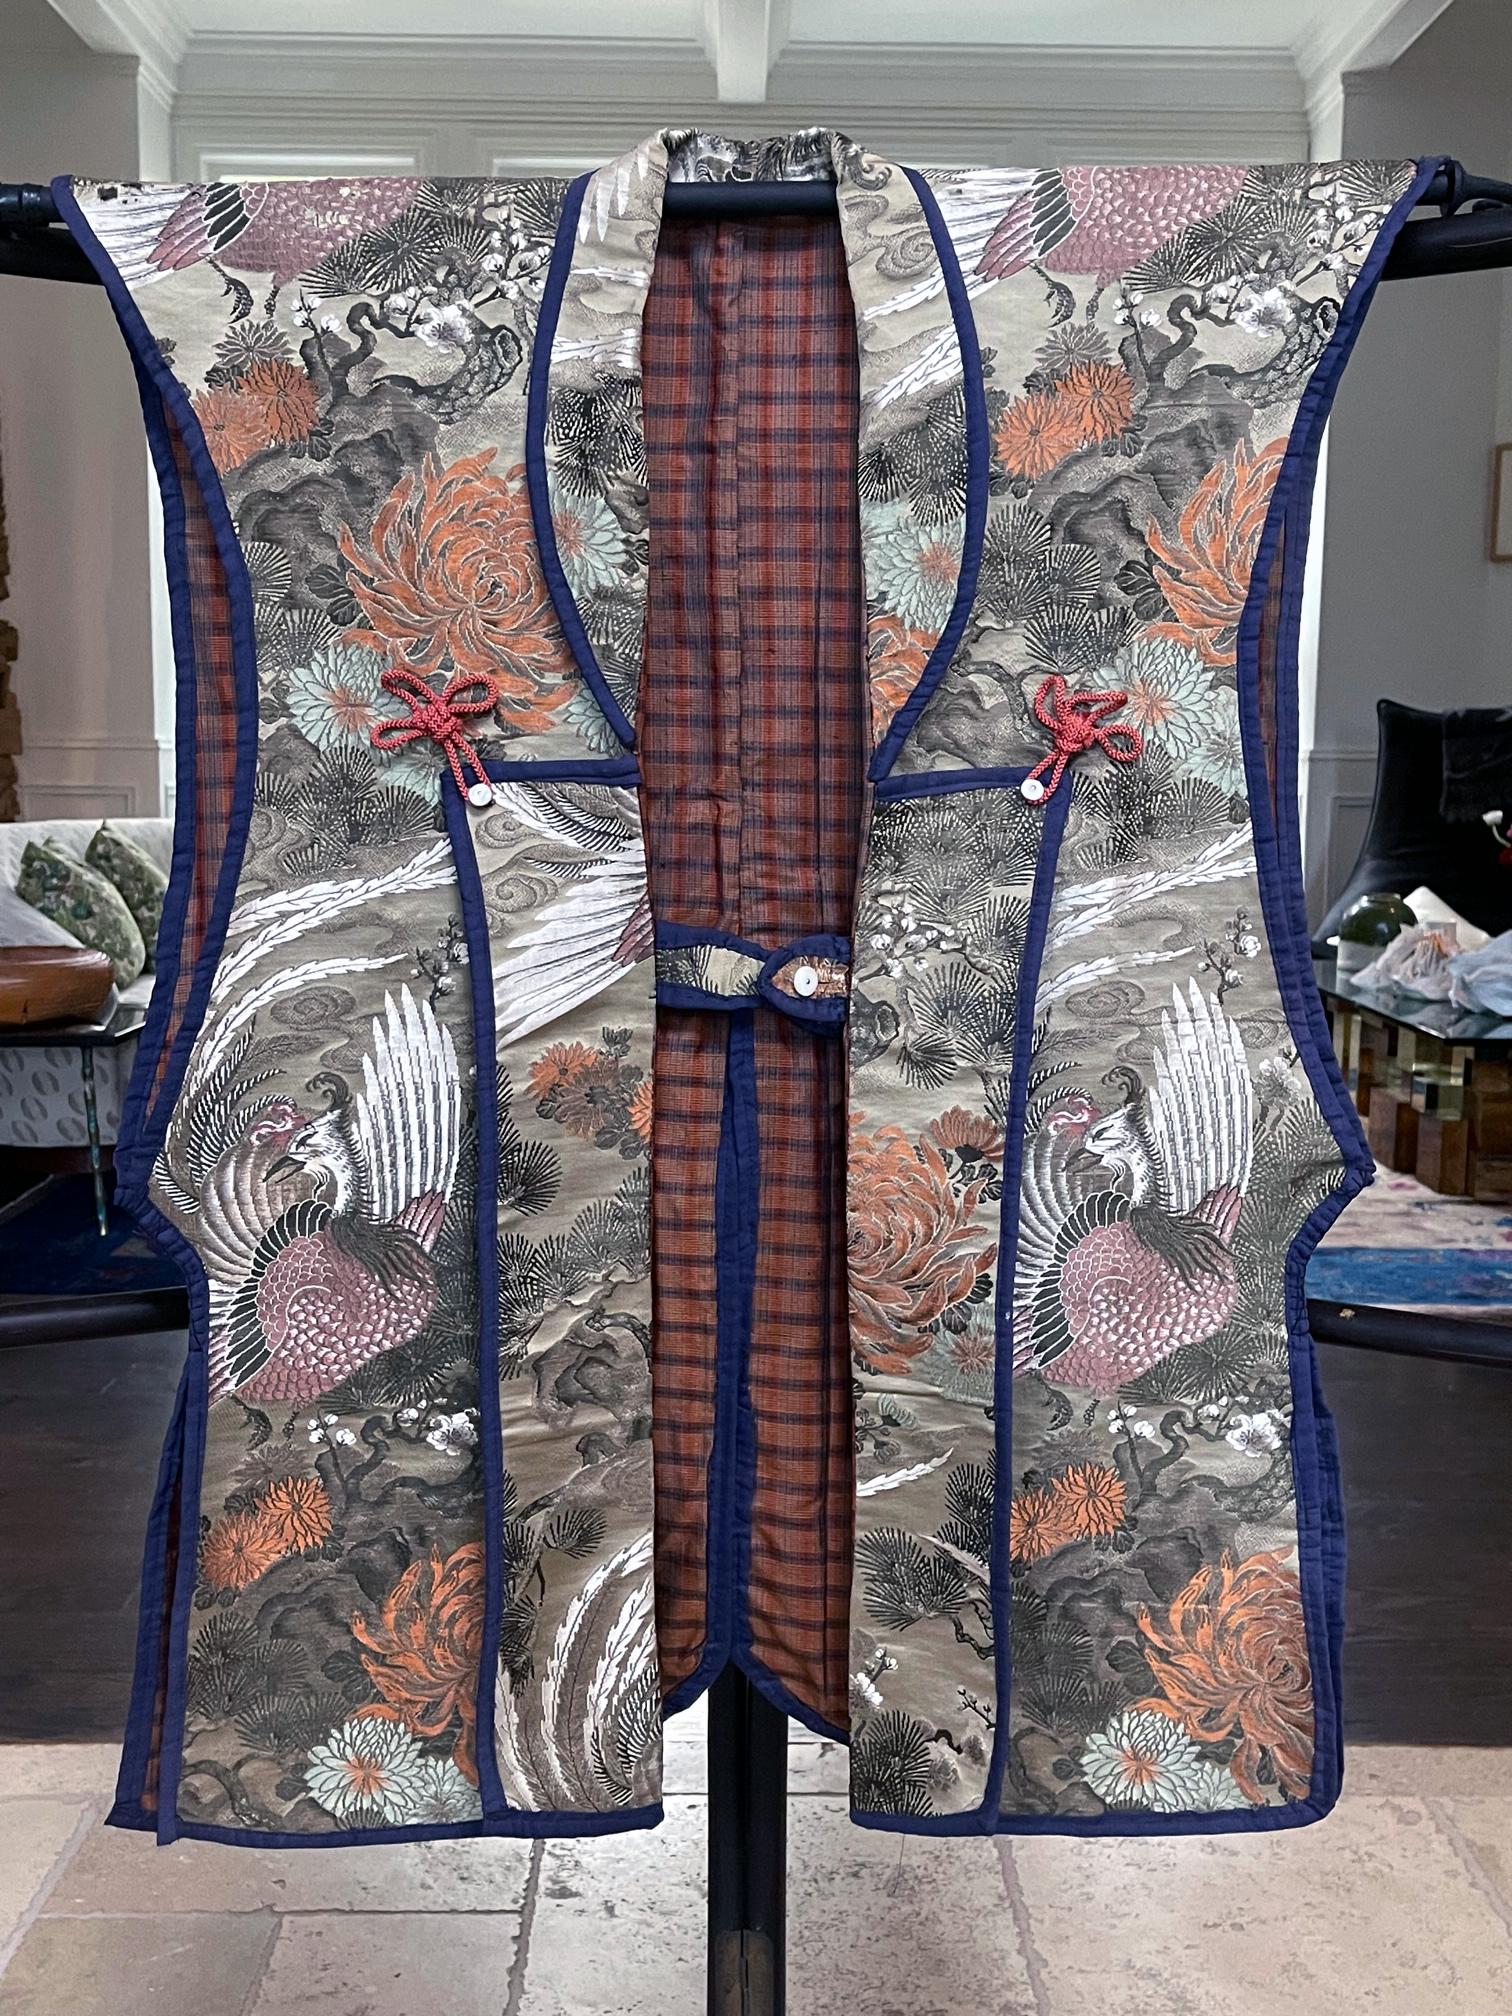 Made entirely from luxuriant woven brocade (kinran) for the exterior, this Japanese sleeveless jacket is called Jinbaori. Commonly worn by the Samurai warriors during 16th century when warfare was common in feudal Japan, this type of loose jacket,